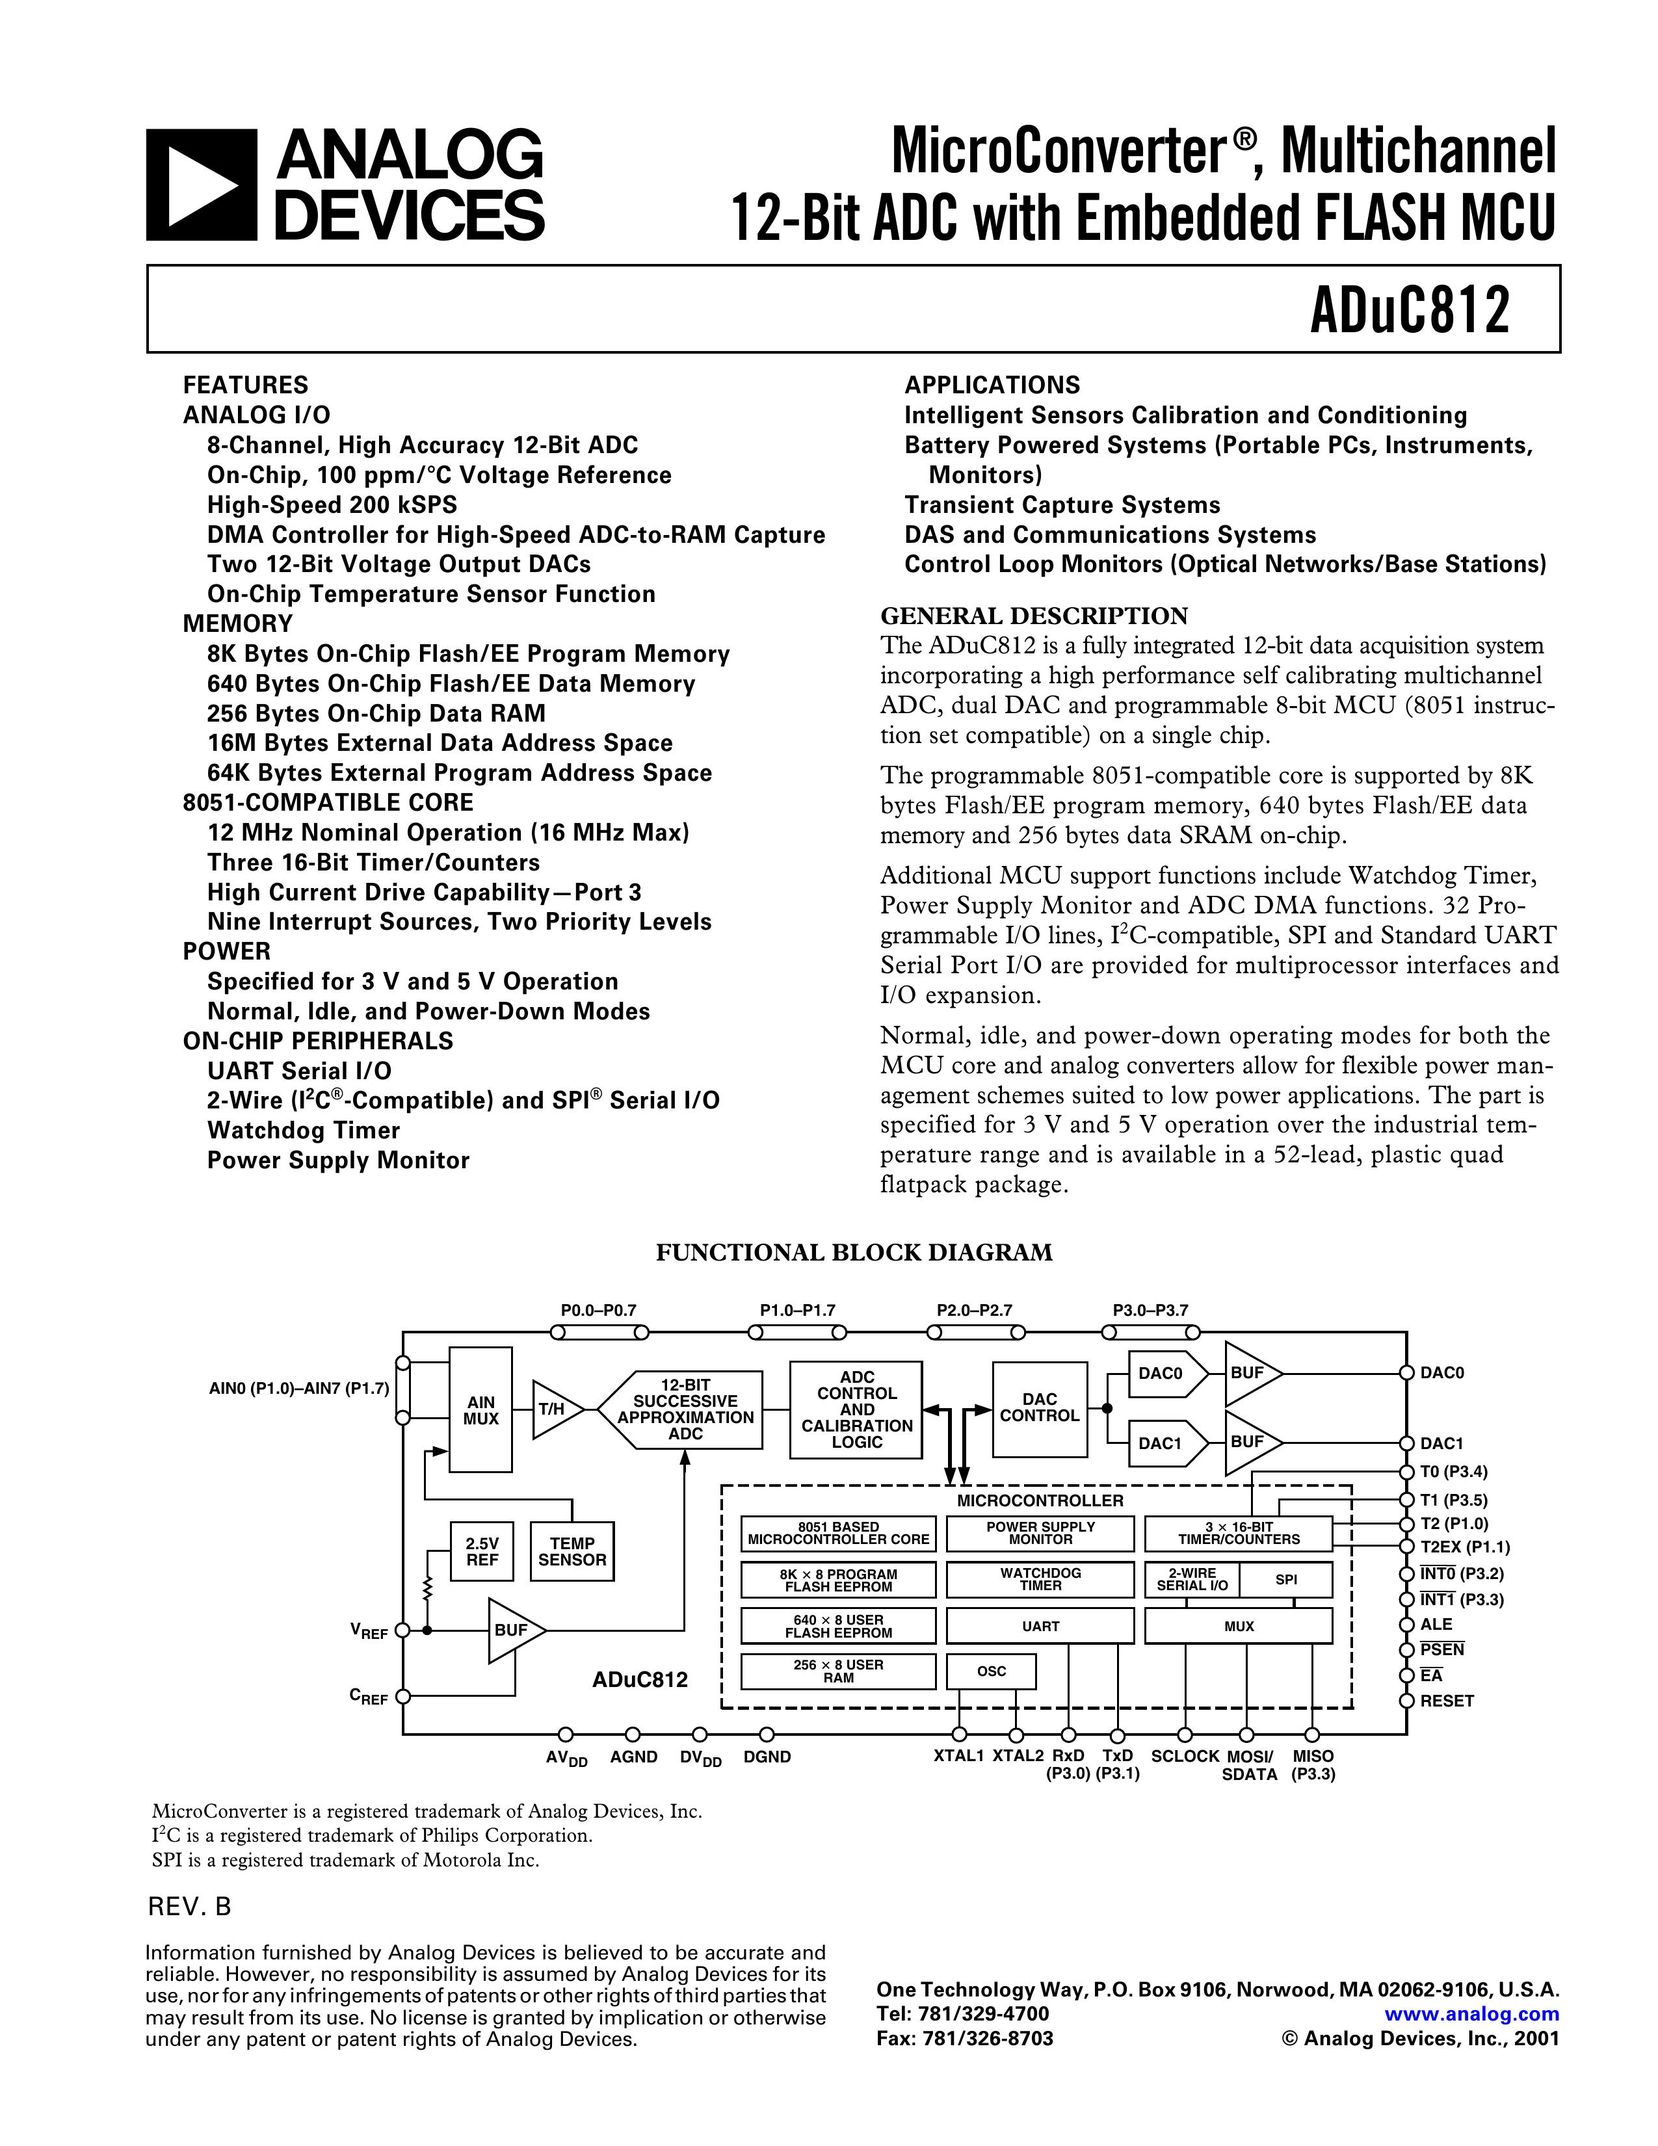 Analog Devices ADuC812 Computer Hardware User Manual